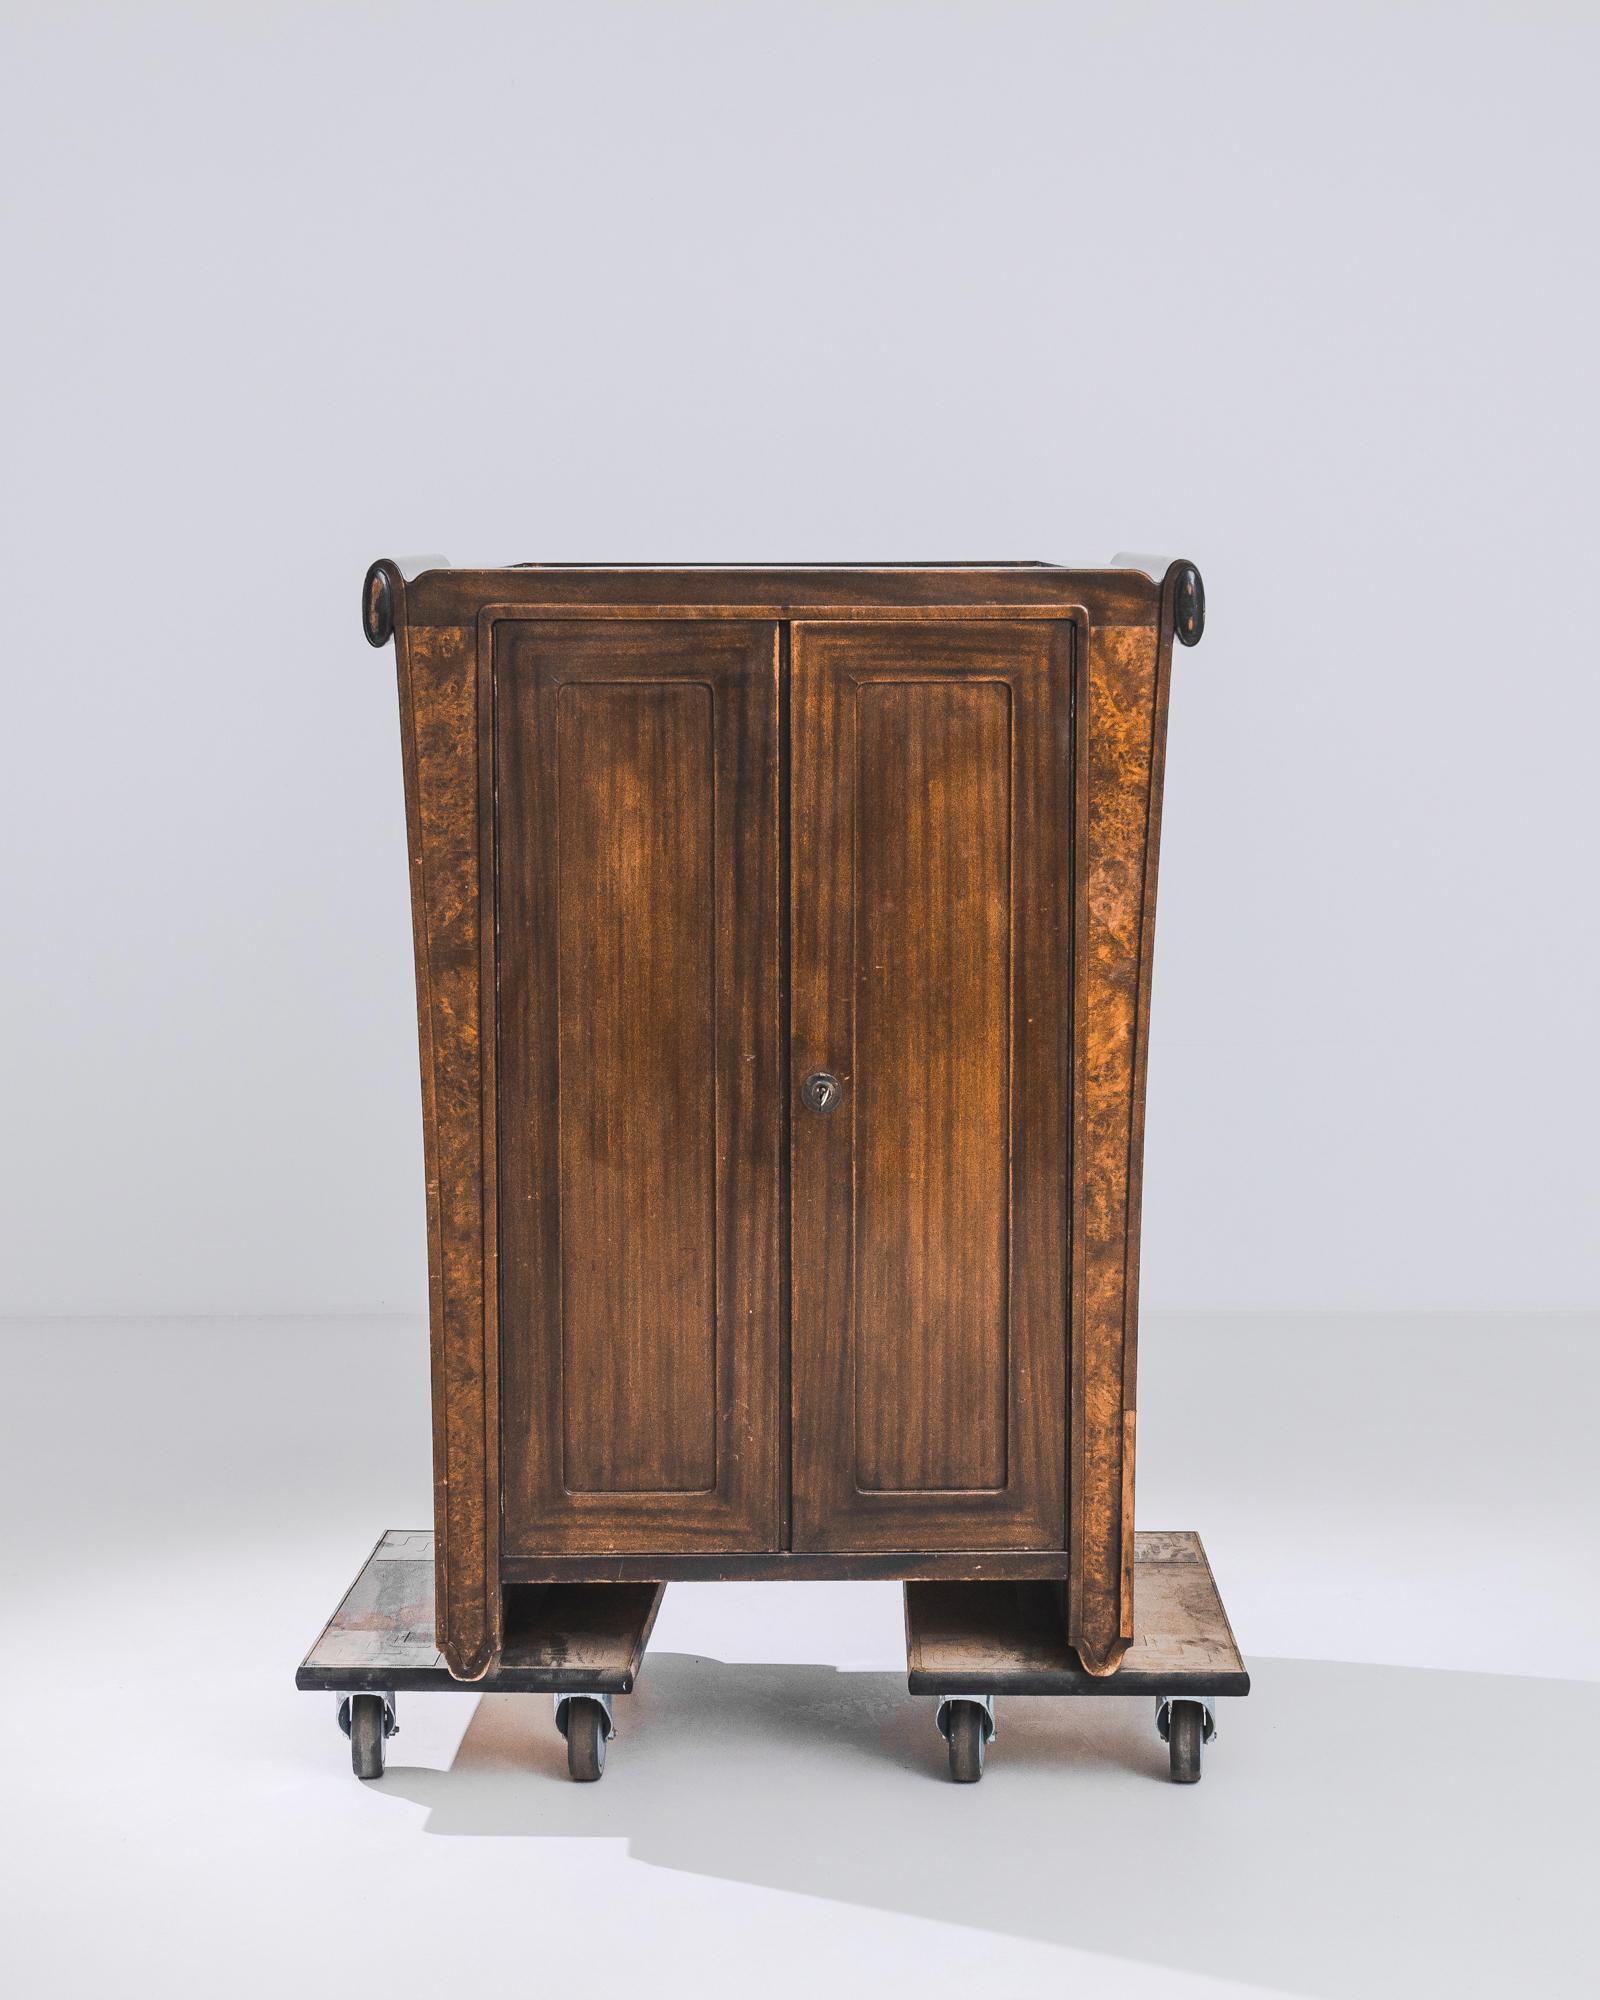 A hardwood cabinet from France, produced circa 1920. Worked to a high shine and with a robust silhouette that maintains the architectural angles of Art Nouveau, this bold cabinet drips opulence. Careful placement of rich wood grain draws the eyes up